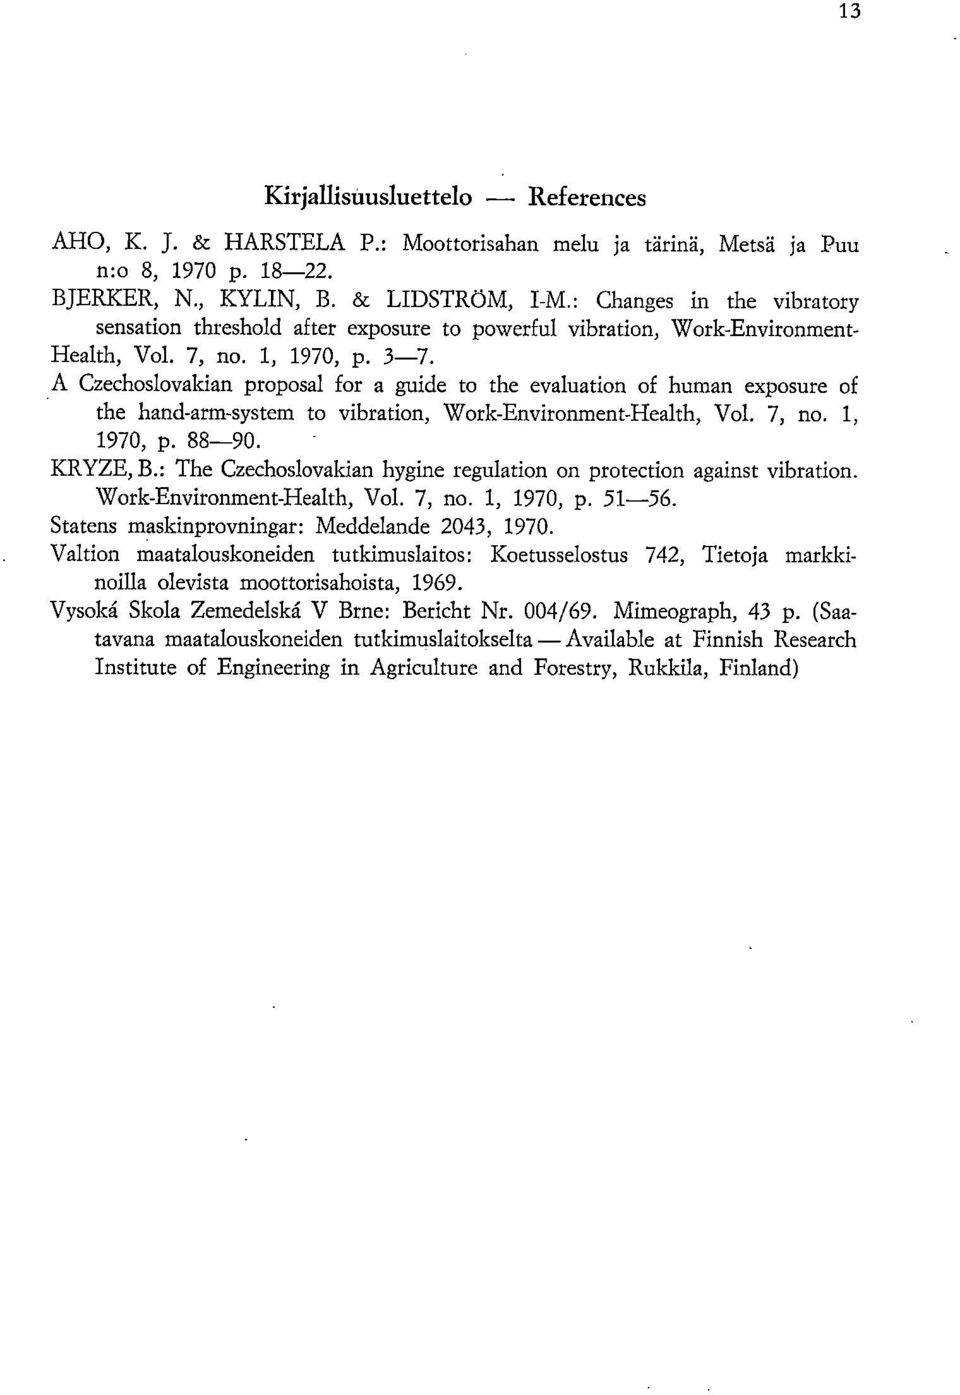 A Czechoslovakian proposal for a guide to the evaluation of human exposure of the hand-arm-system to vibration, Work-Environment-Health, Vol. 7, no. 1, 1970, p. 88-90. KRYZE, B.